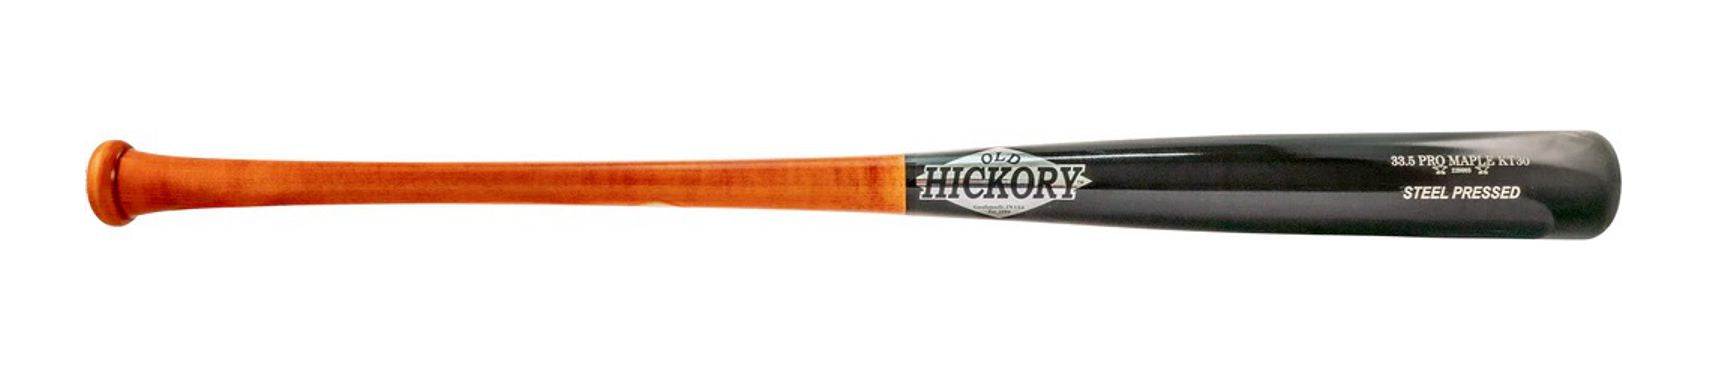 Old Hickory KT30 Pro Maple Steel Pressed